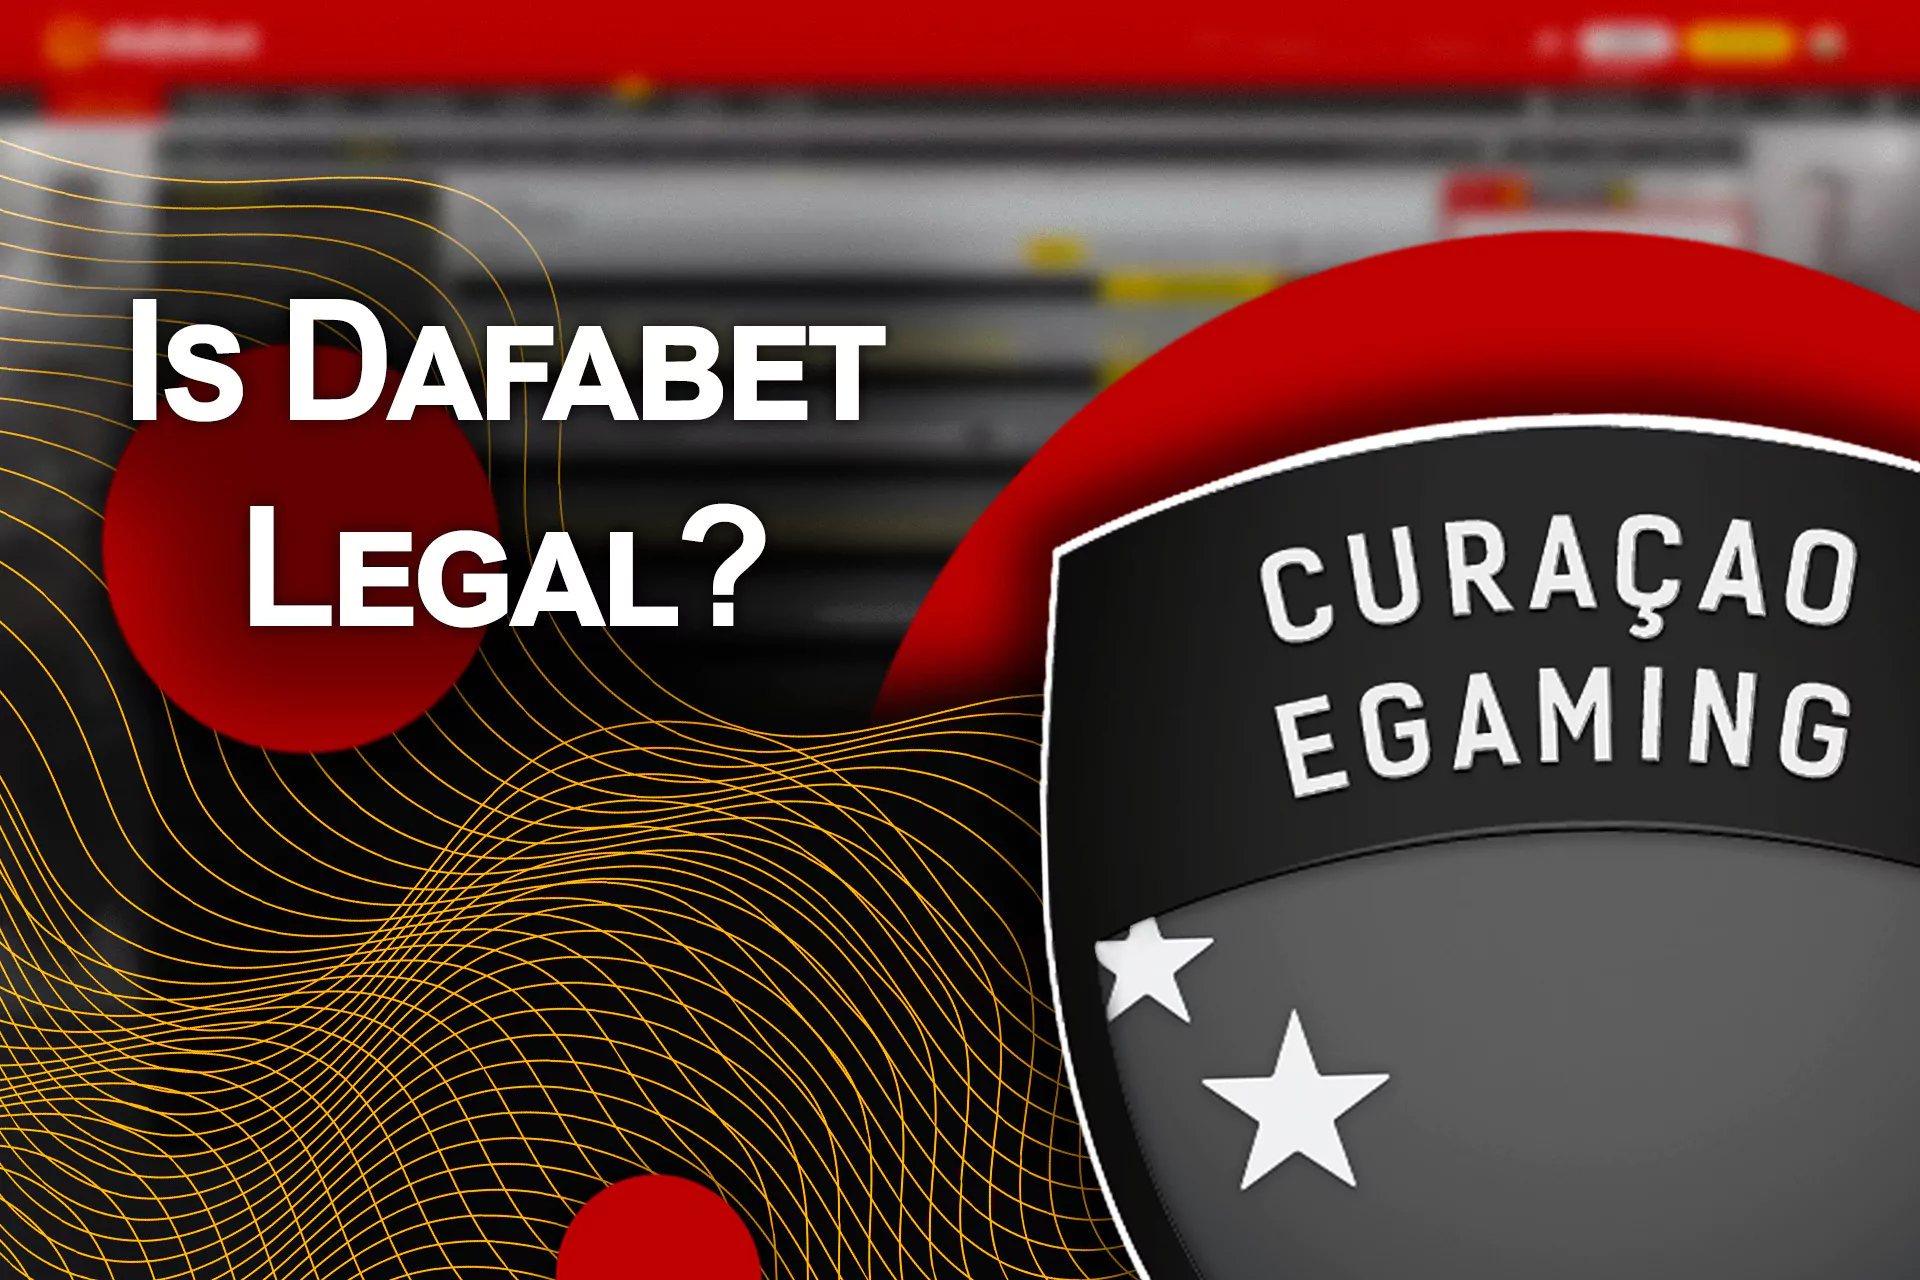 Thanks to the Curacao license, betting on cricket and other sports matches at Dafabet is totally legal in India.